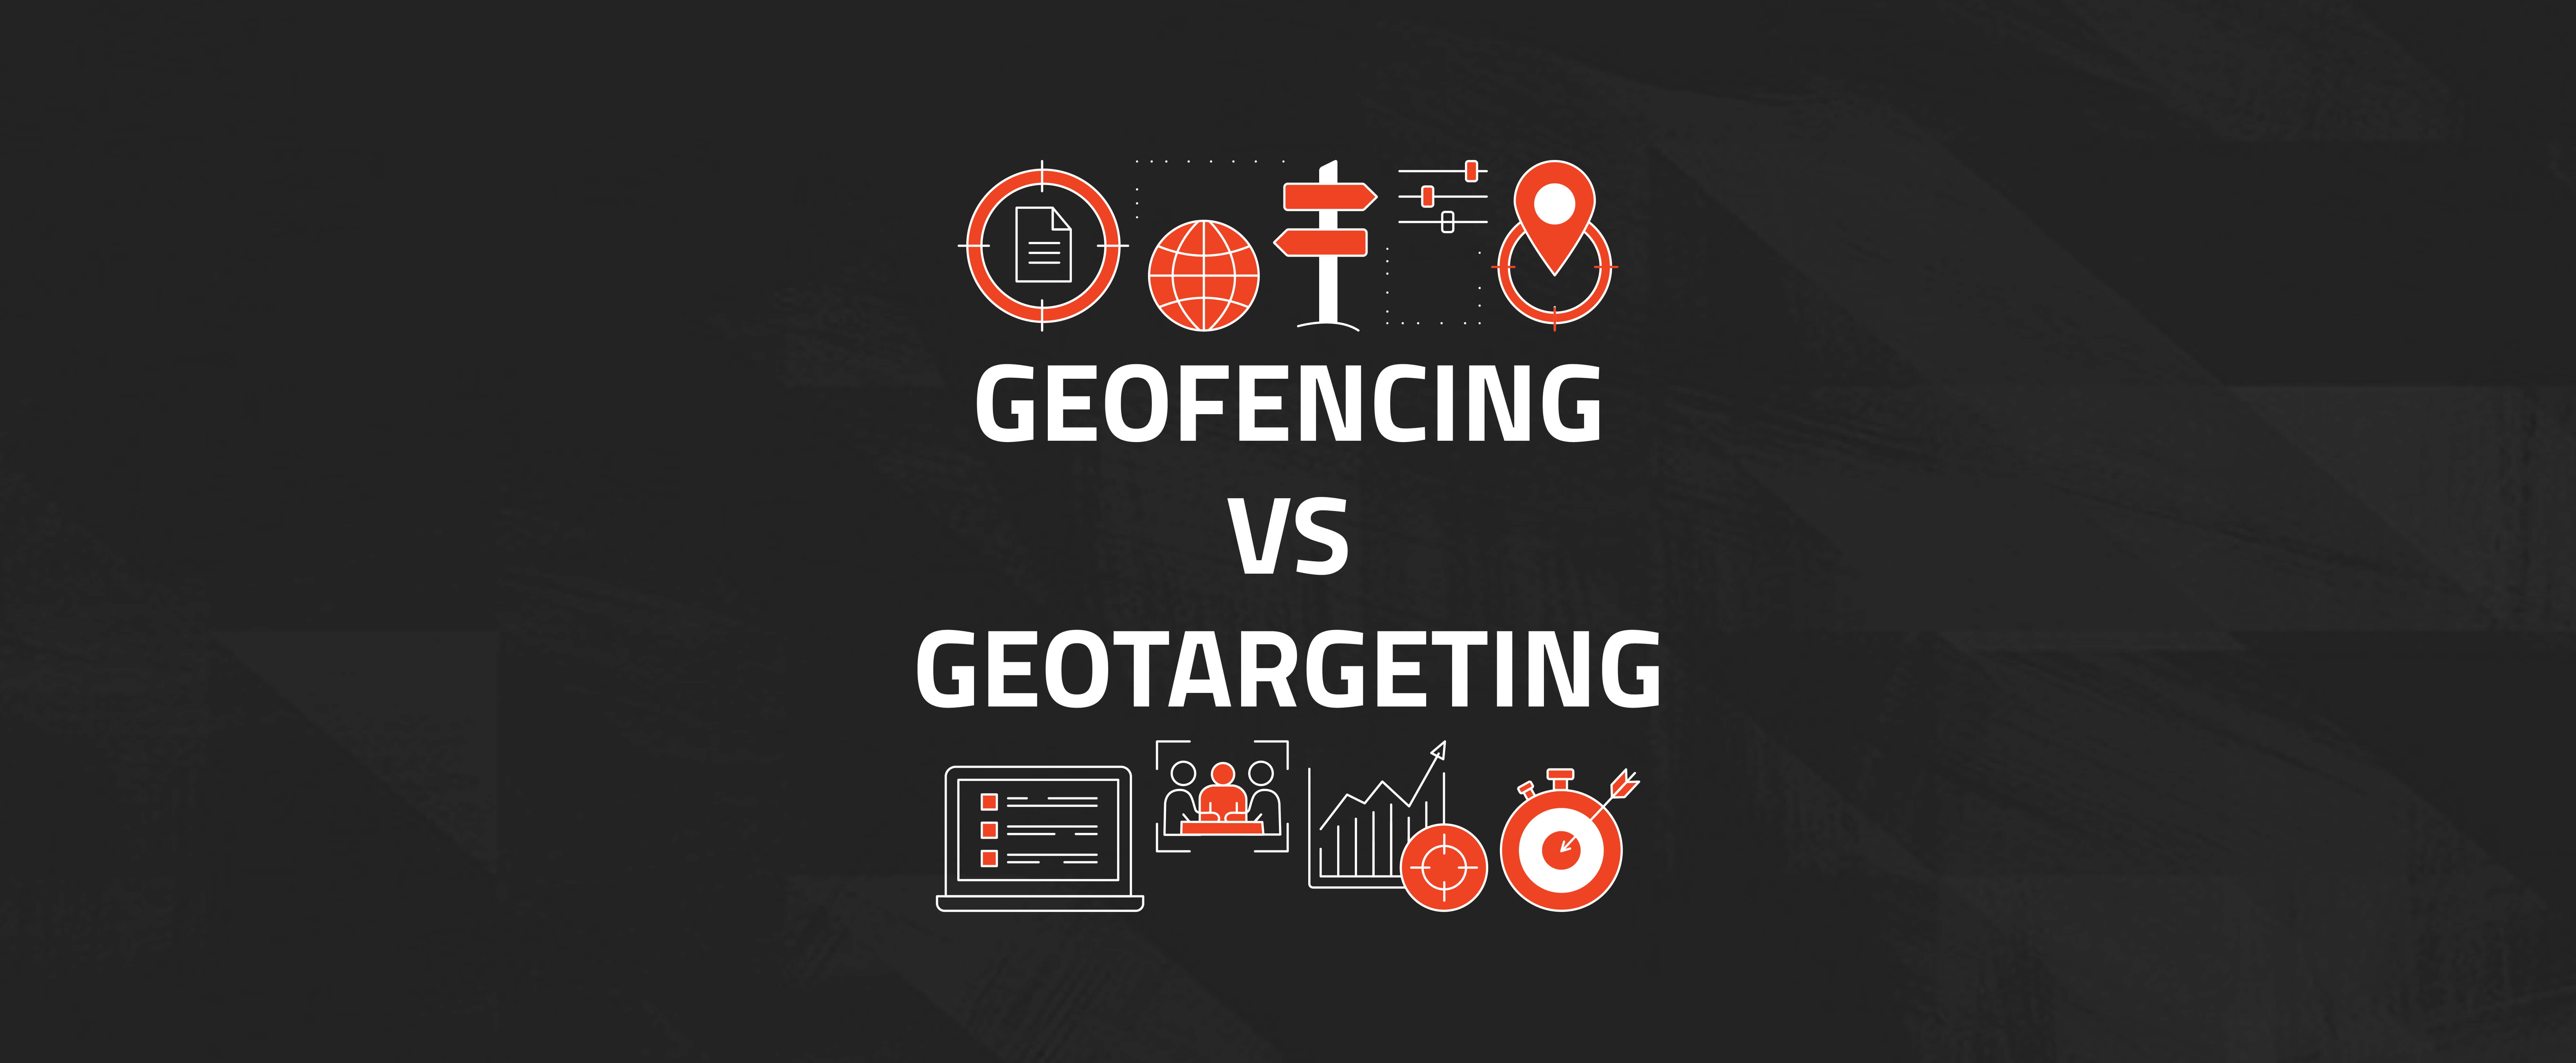 Geofencing VS Geotargeting – The Who’s Who of Geotactics